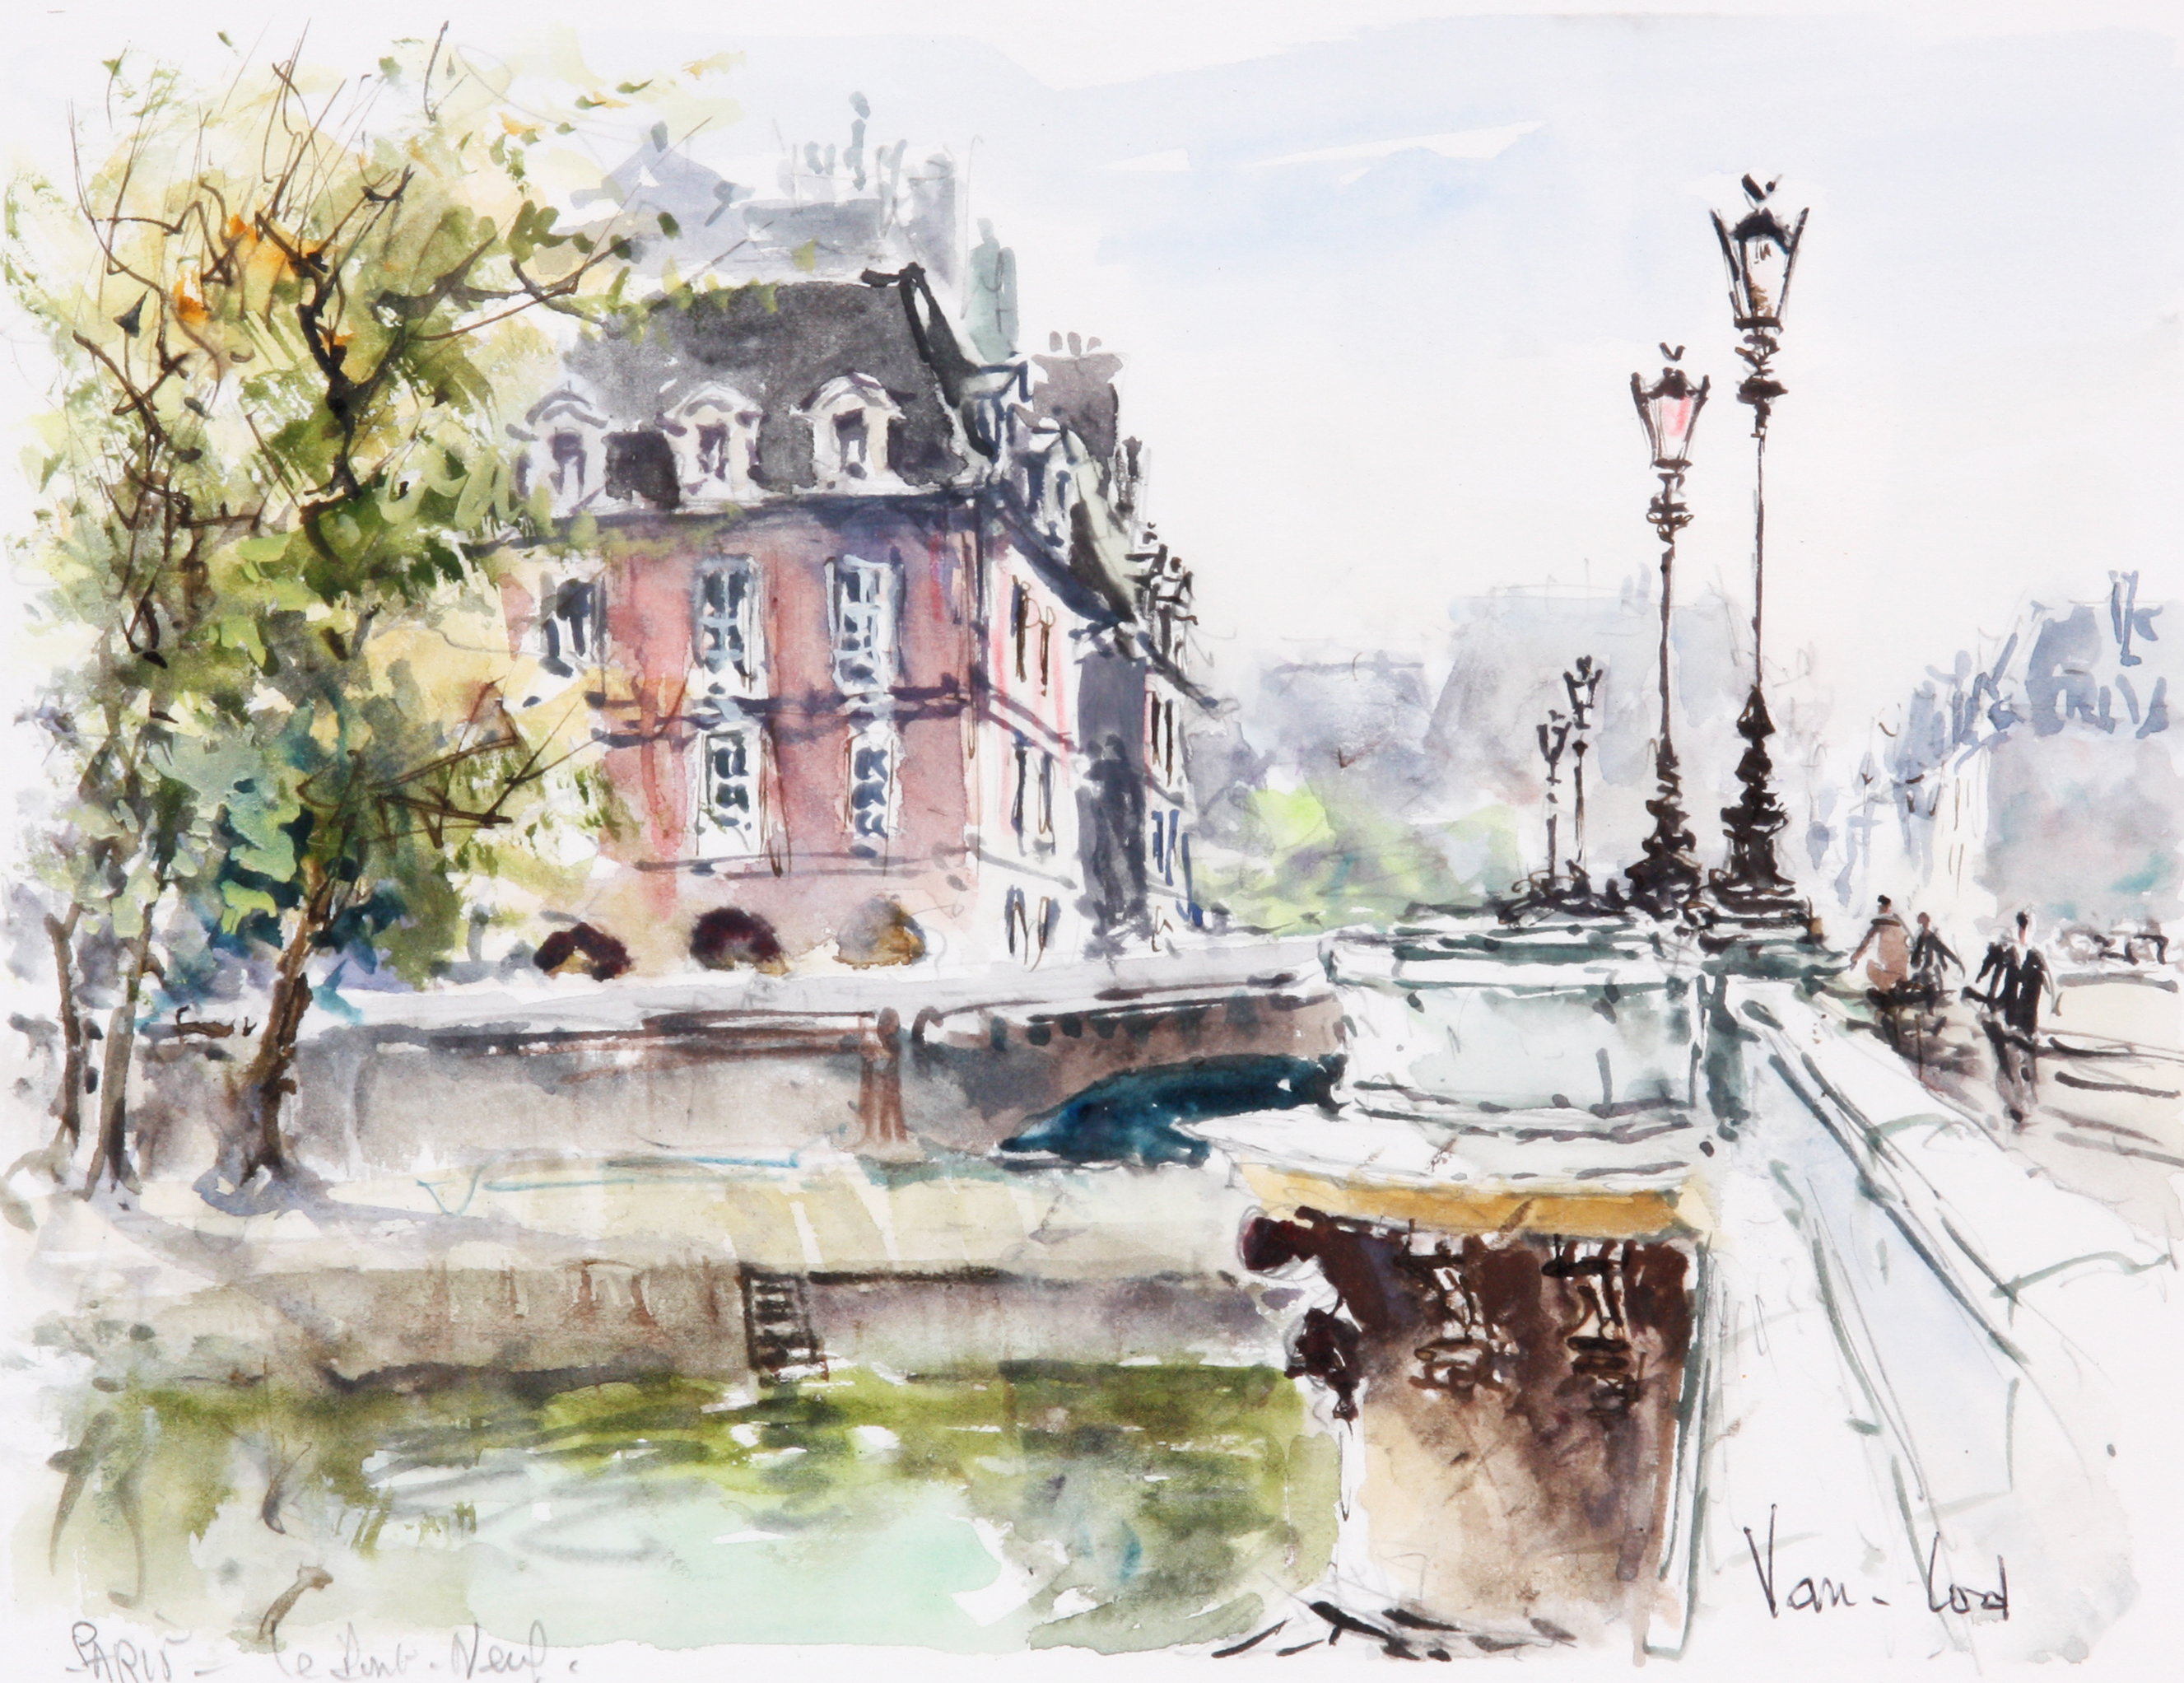 VAN LOD WATERCOLOUR Paris - Le Pont Neuf 29cm high 35cm wide - signed and titled in glazed gilt